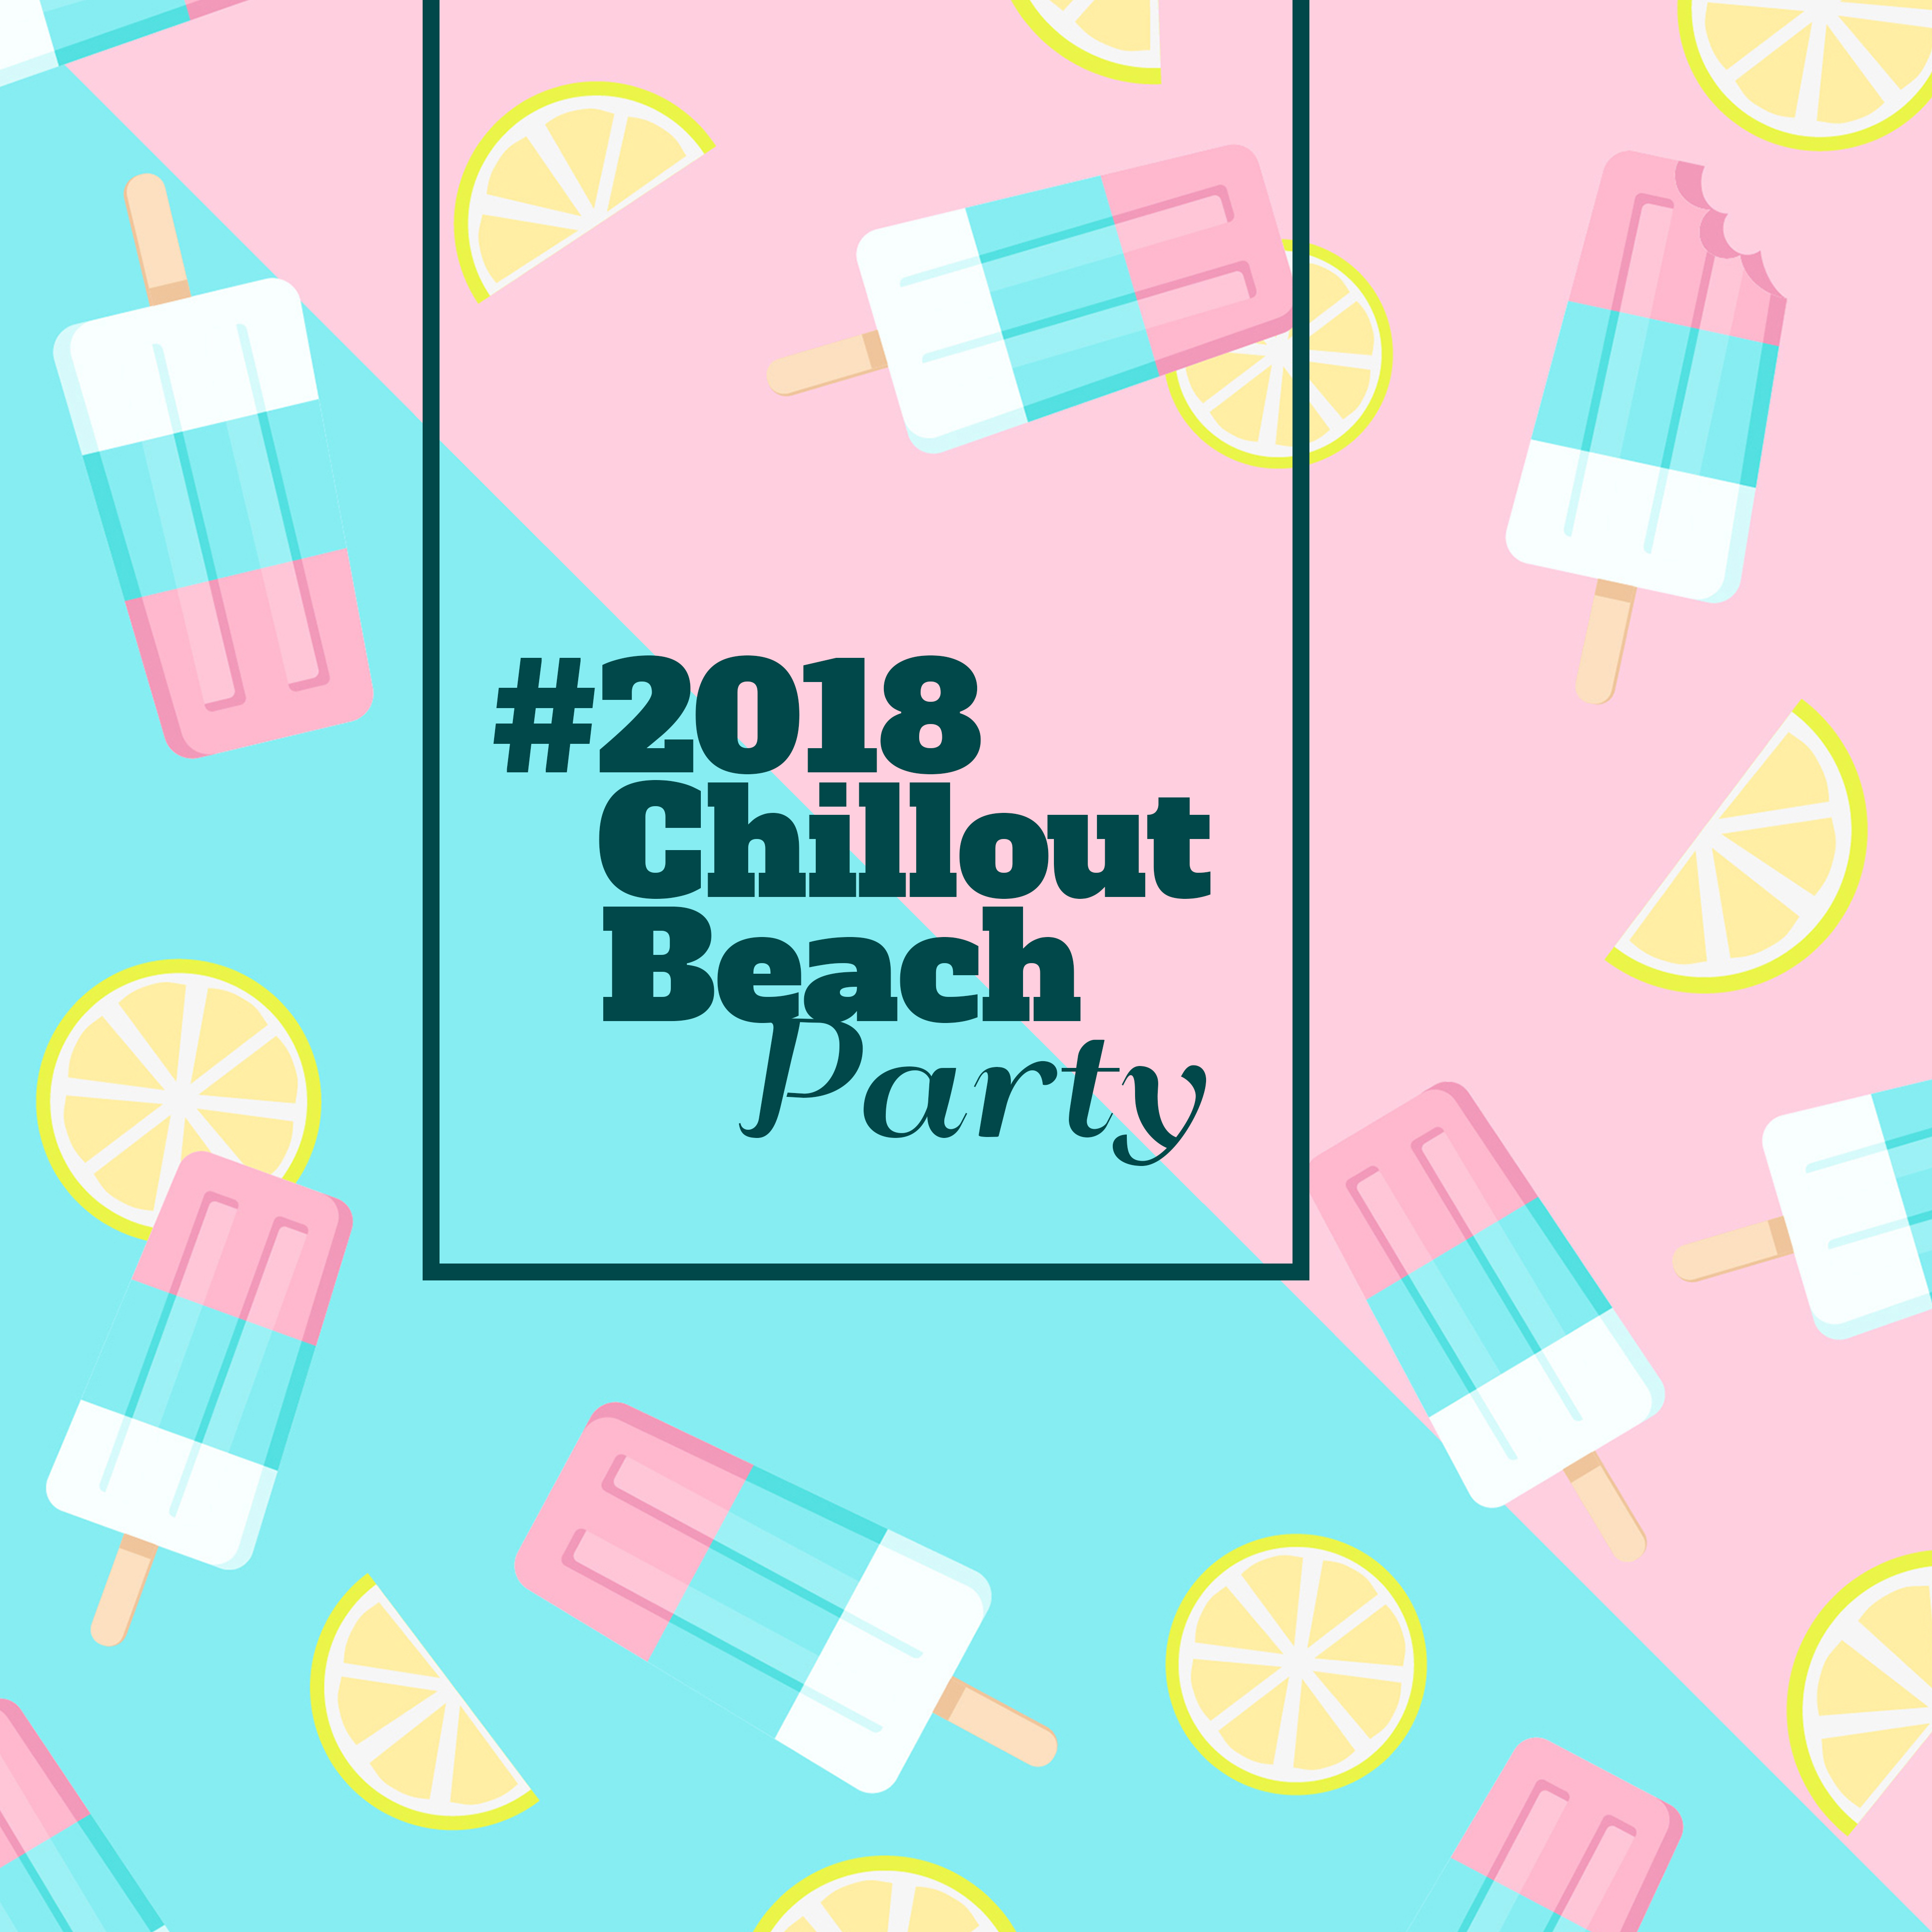 #2018 Chillout Beach Party